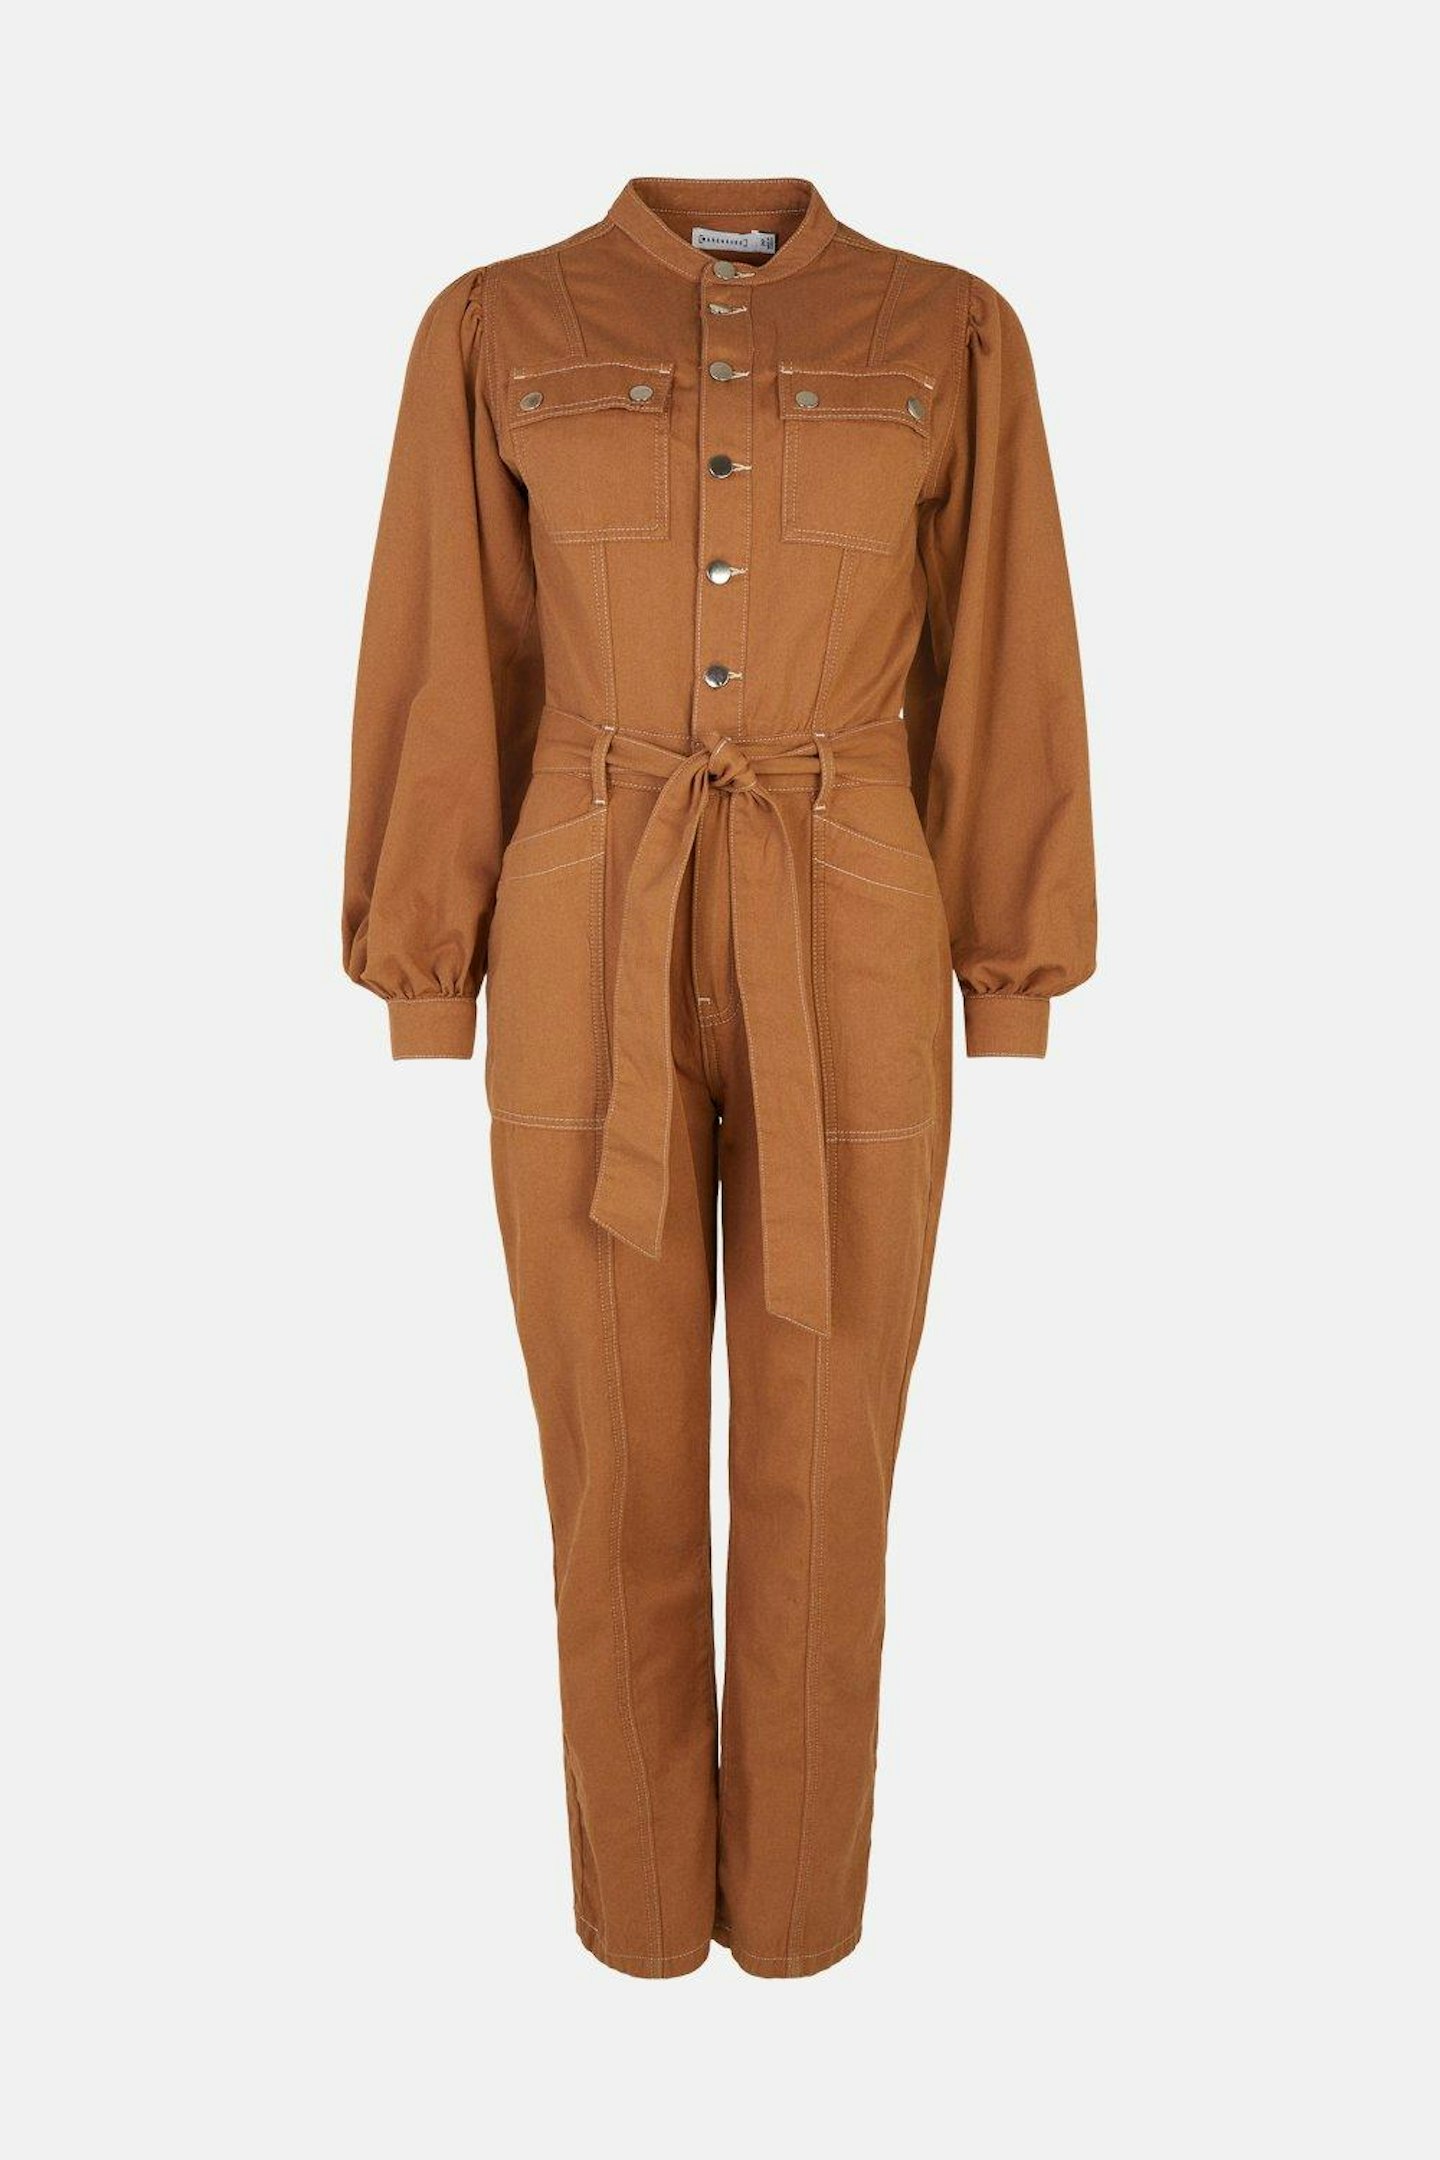 Warehouse, Petite Twill Utility Belted Boilersuit, WAS £99 NOW £79.20